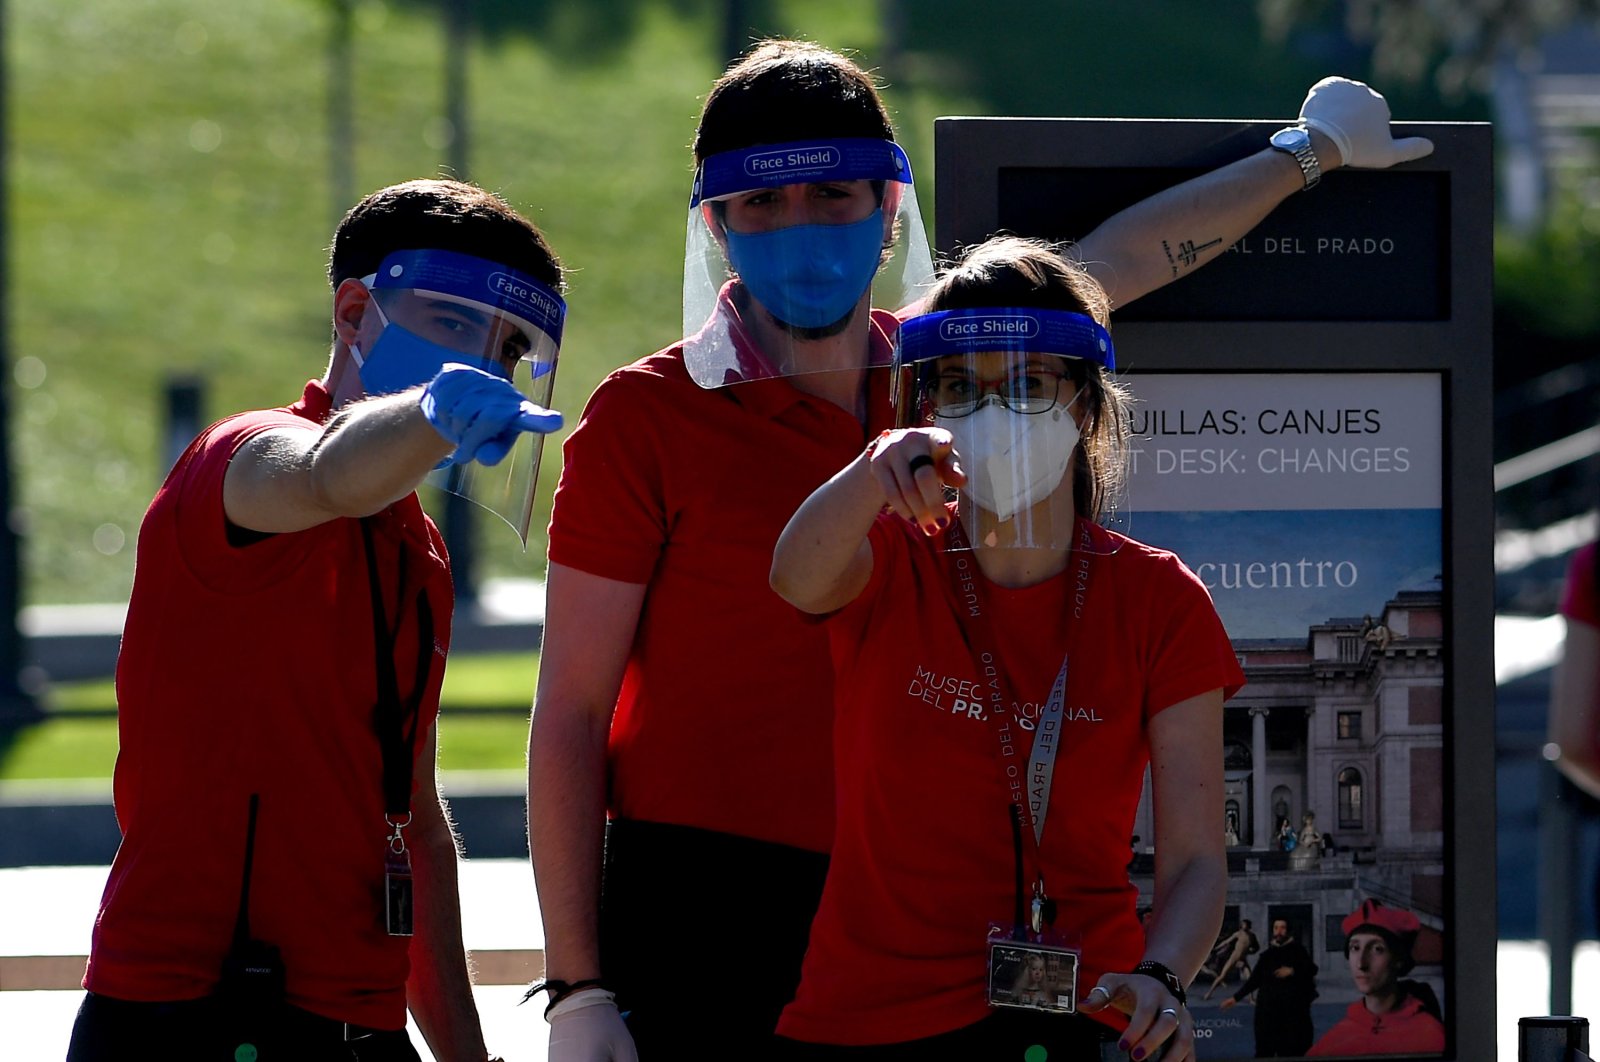 Employees wearing face masks and shields place information panels outside The Prado Museum in Madrid, on June 6, 2020. (AFP Photo)